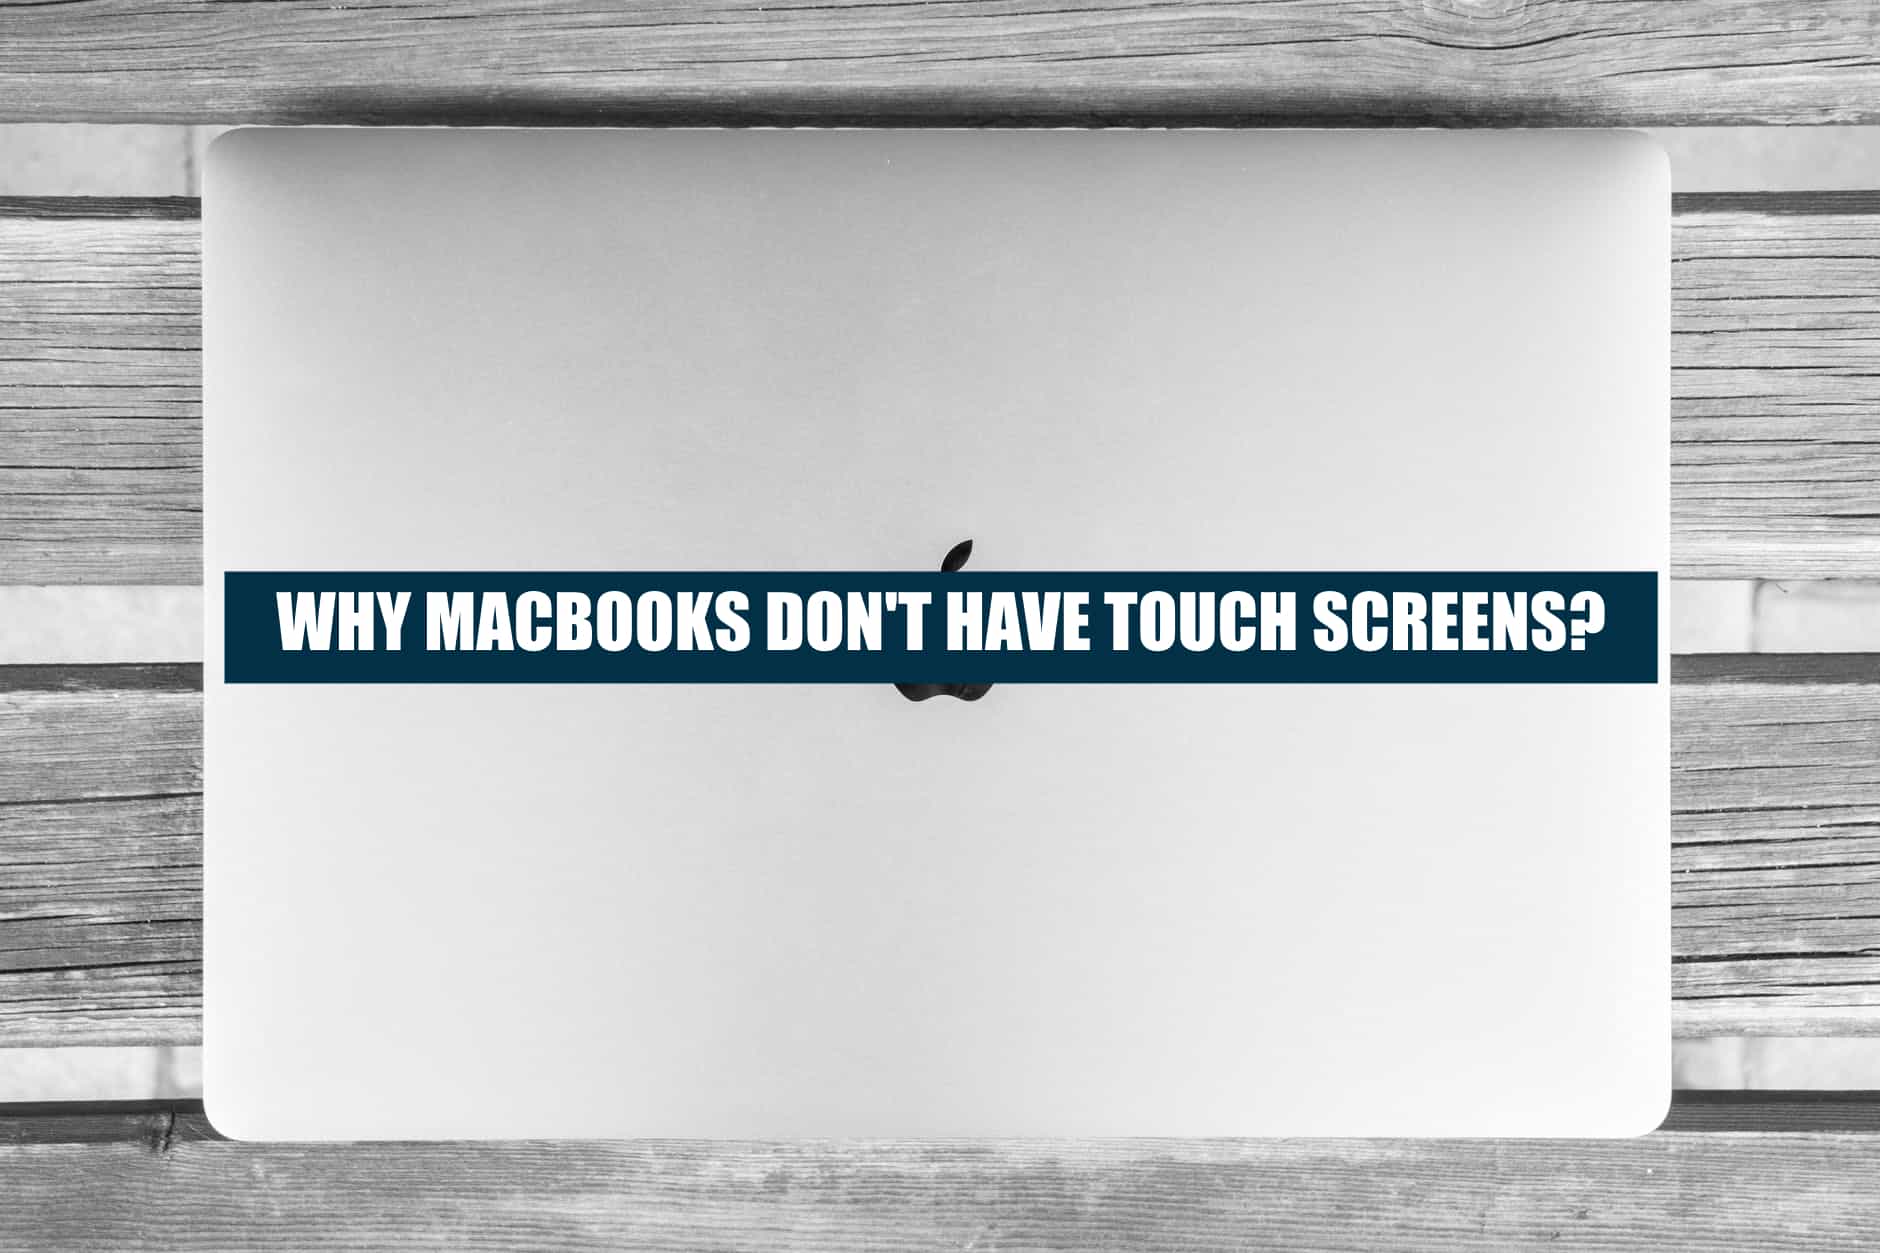 why macs dont have touch Screens